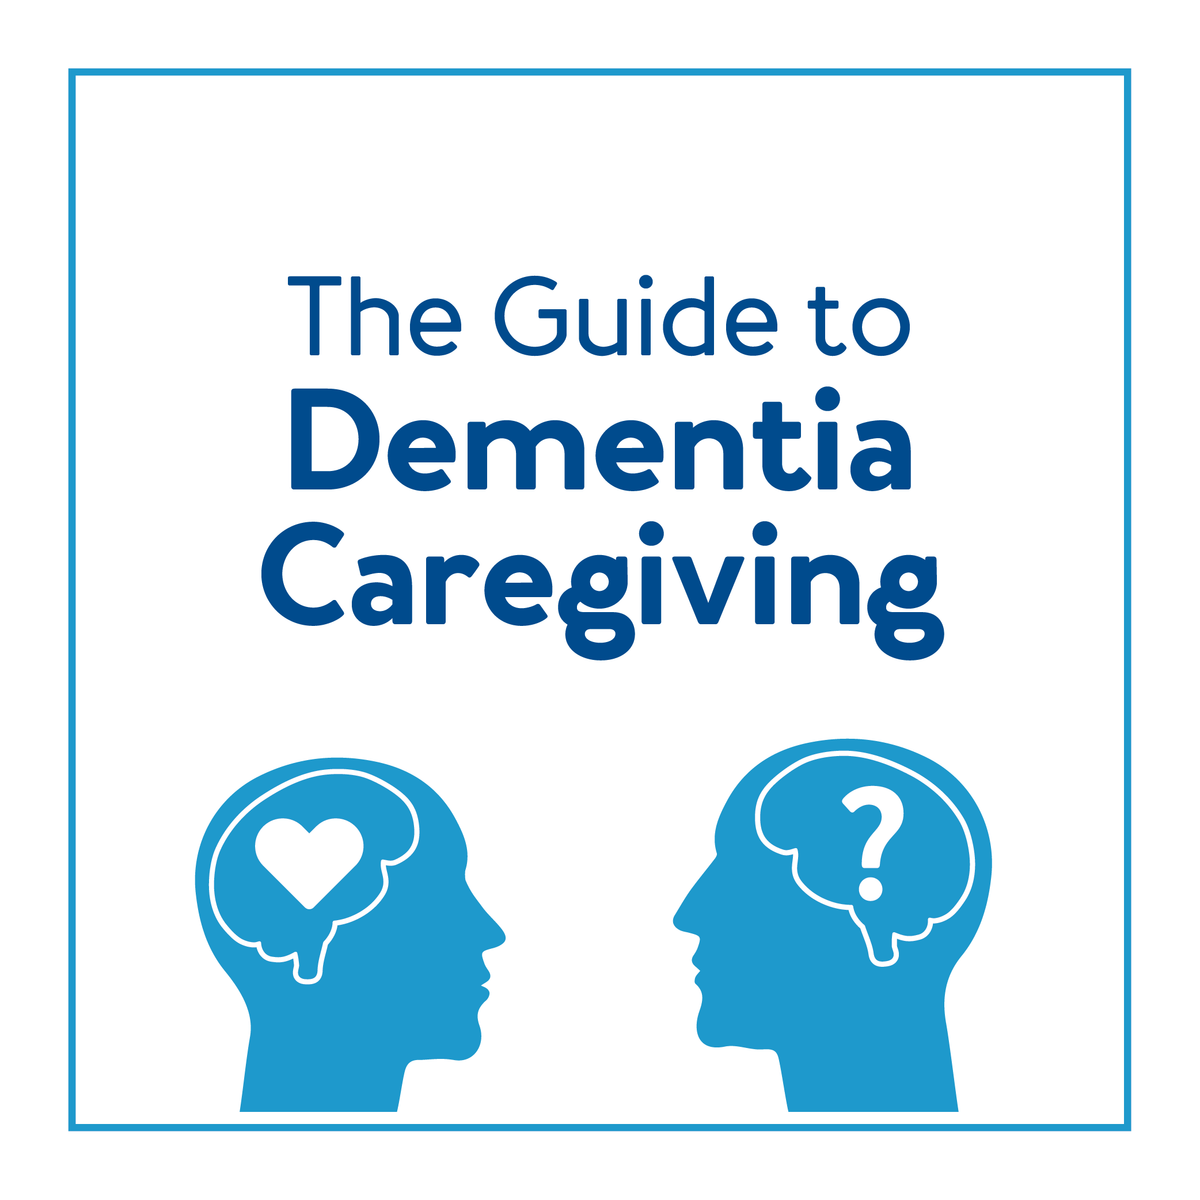 Two head graphics with text, “The Guide to Dementia Caregiving”